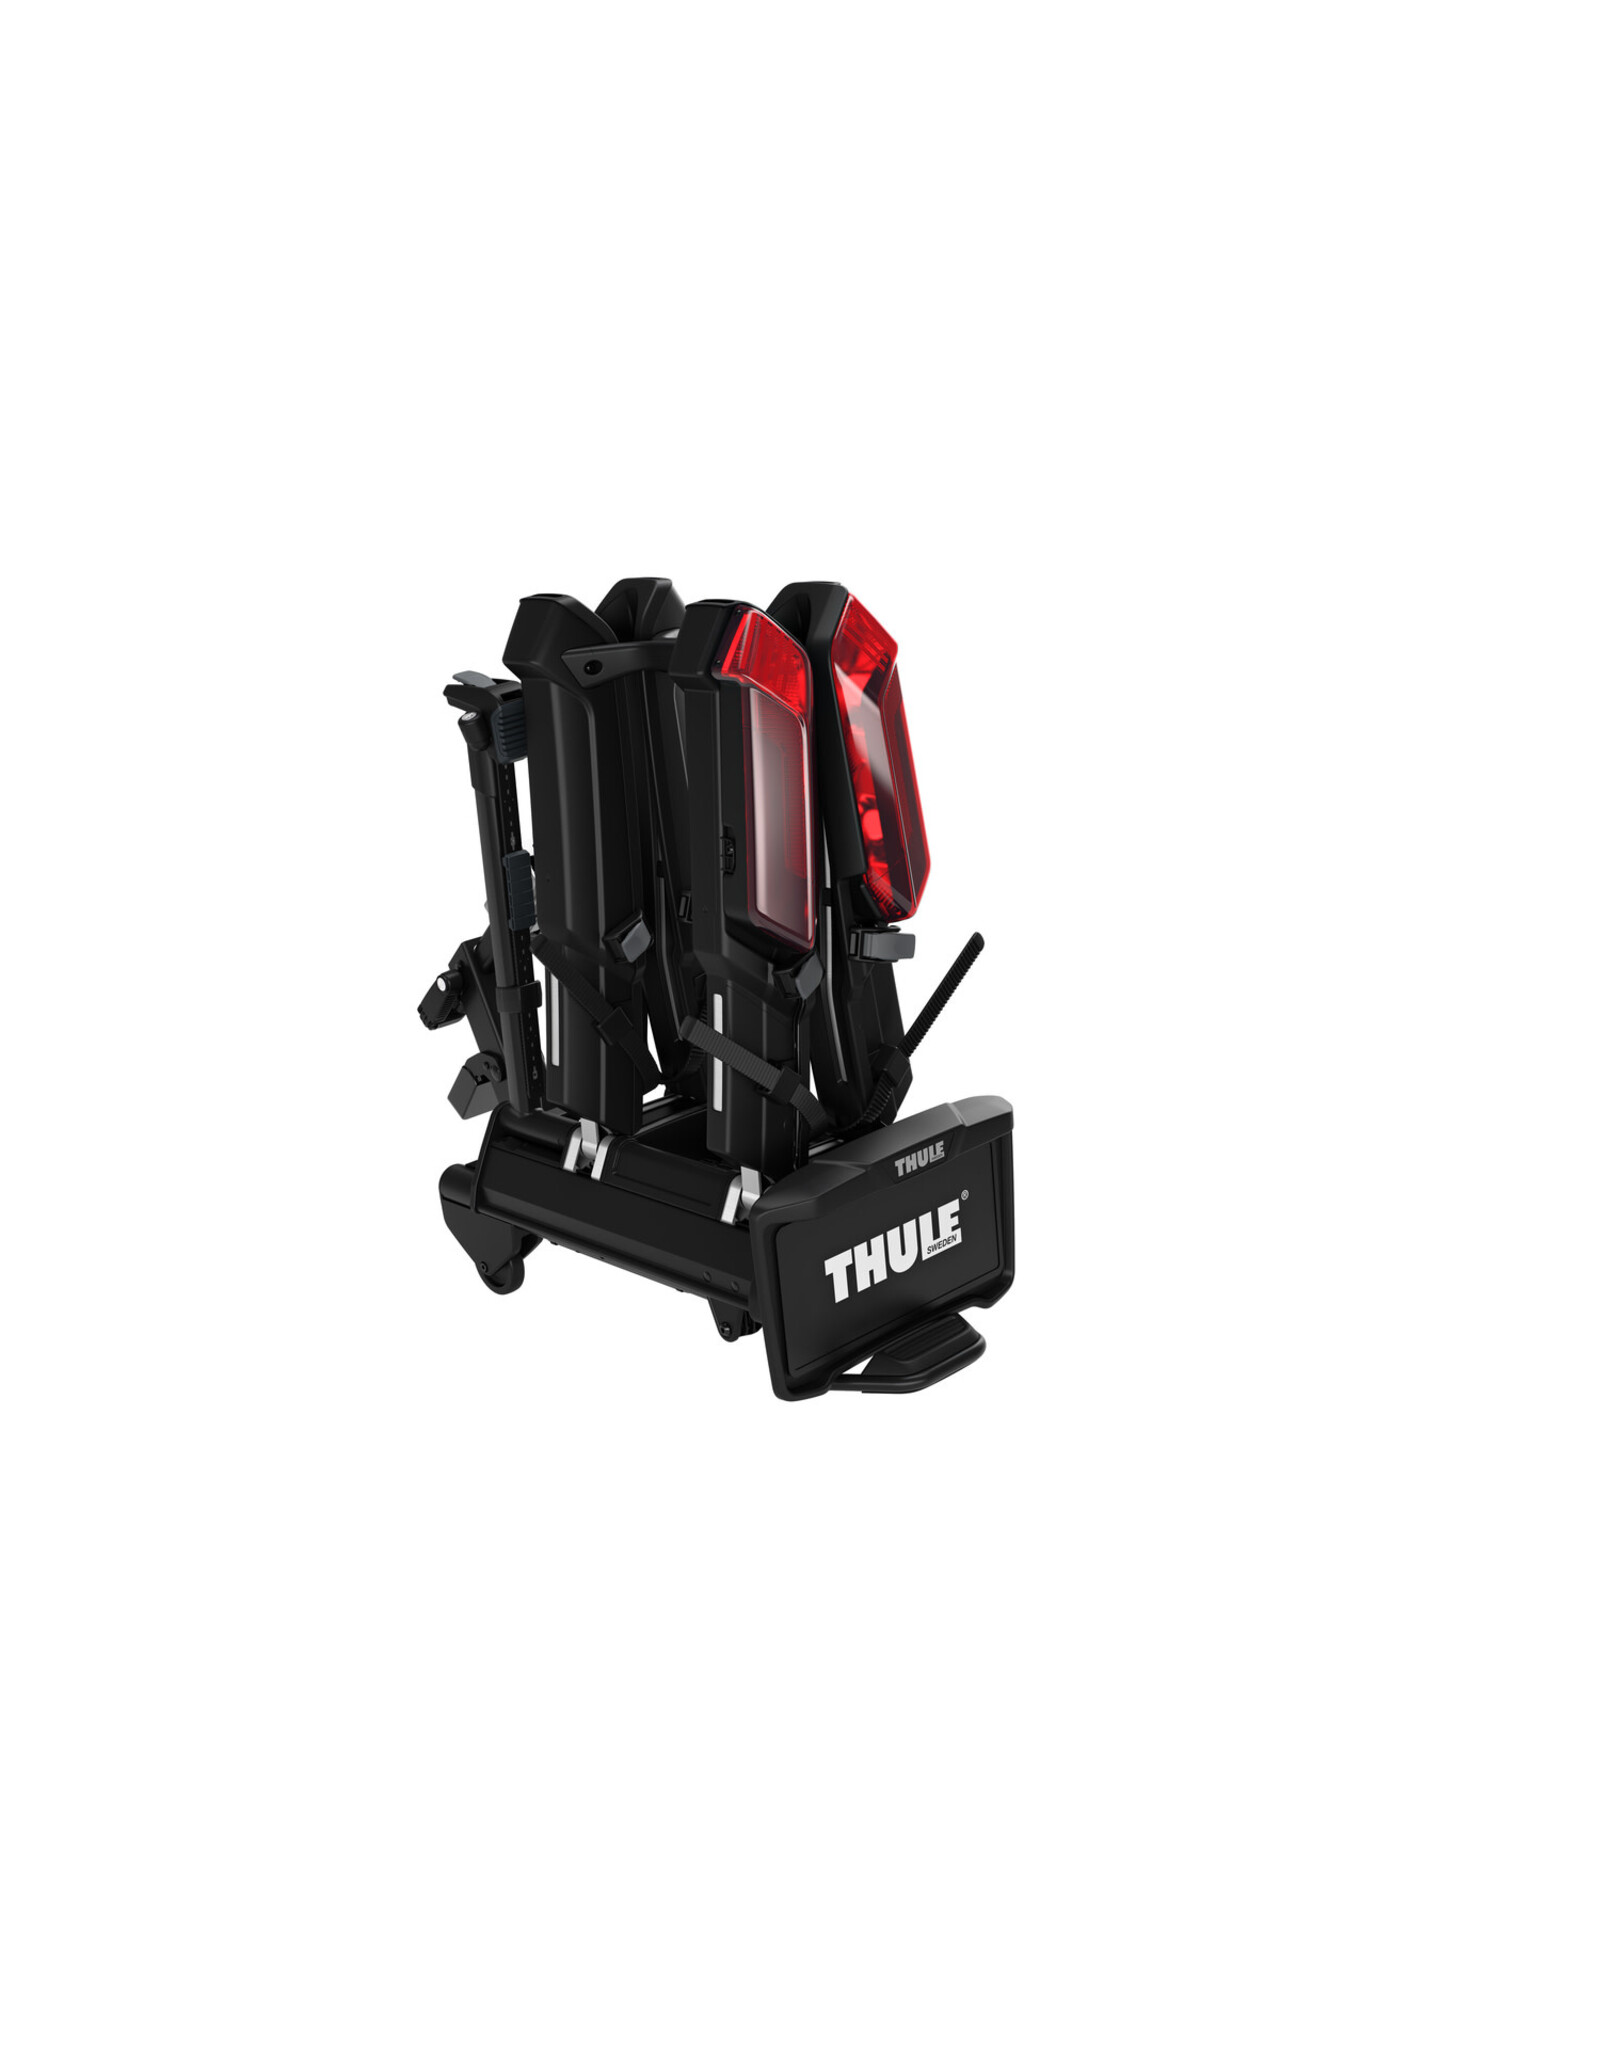 THULE Thule Epos 2 with Lights